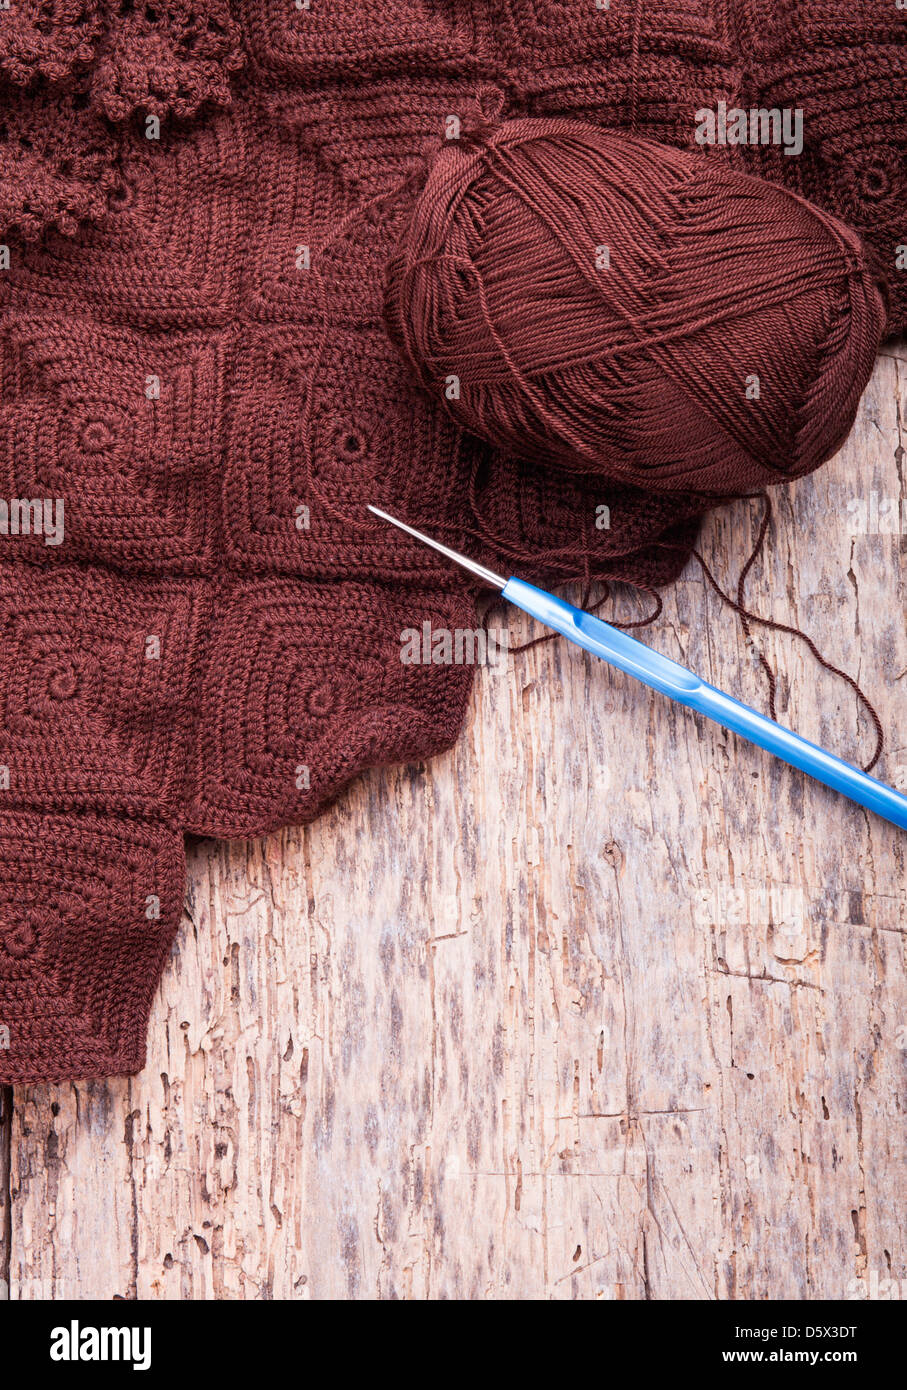 Crochet. Threads on a wooden surface Stock Photo